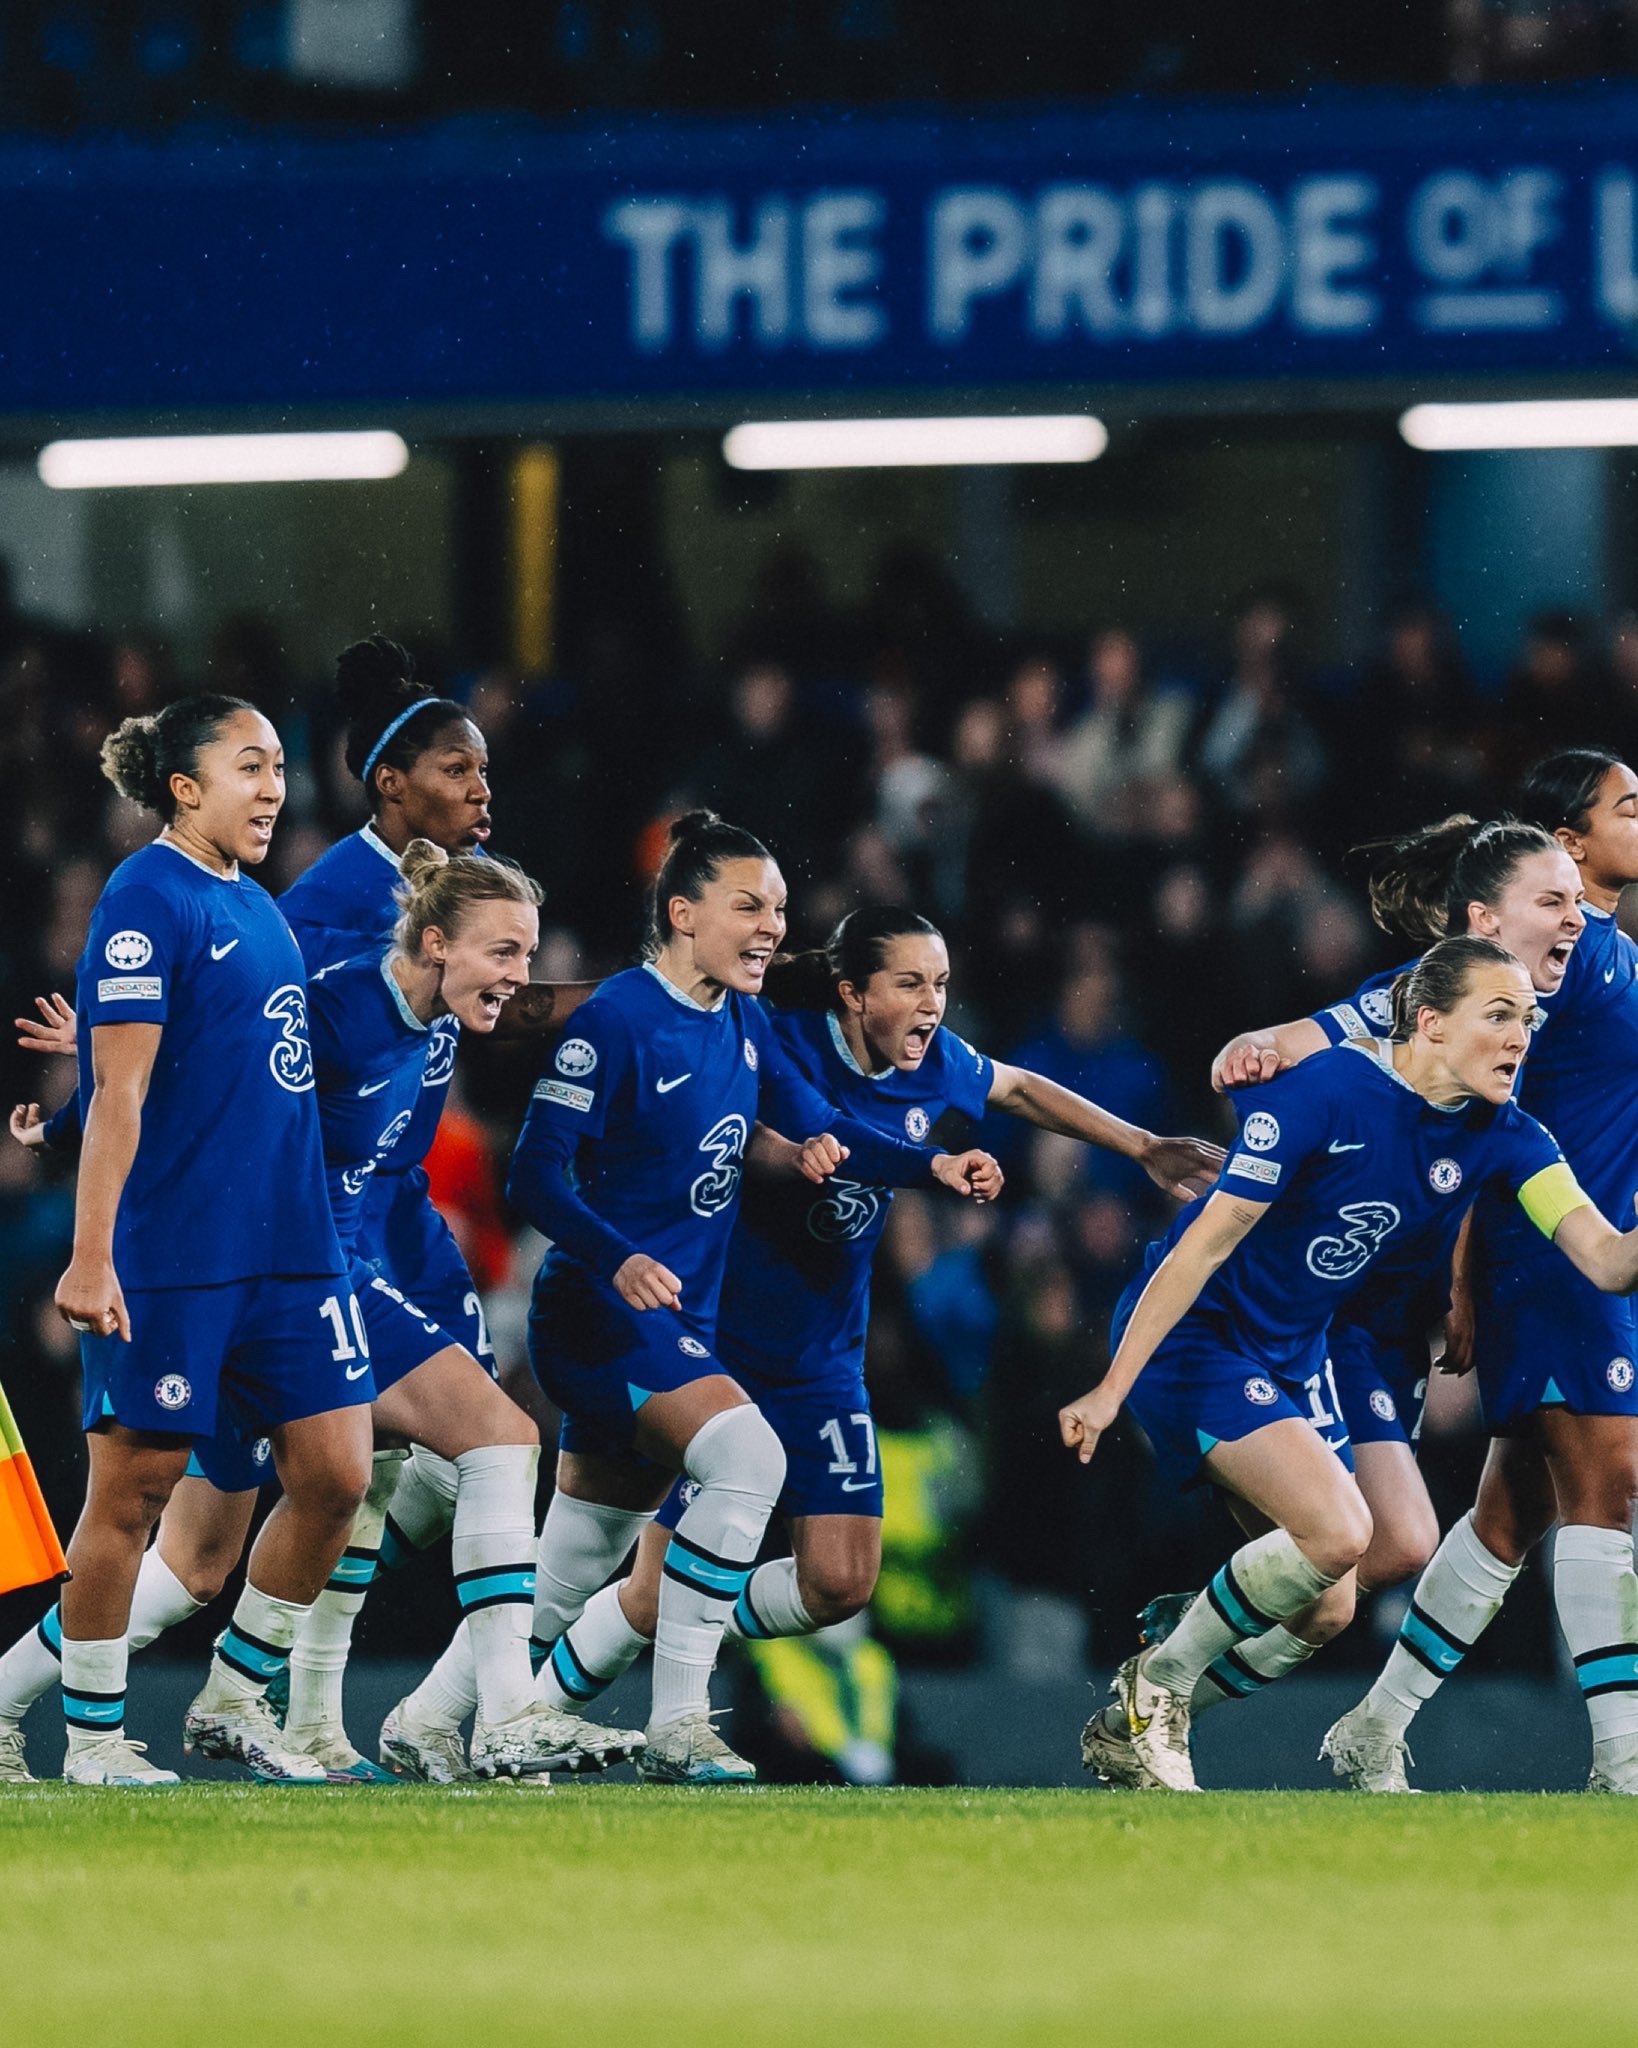 CHELSEA WOMEN’S TEAM STAGES DRAMATIC COMEBACK TO BEAT LYON ON PENALTIES.